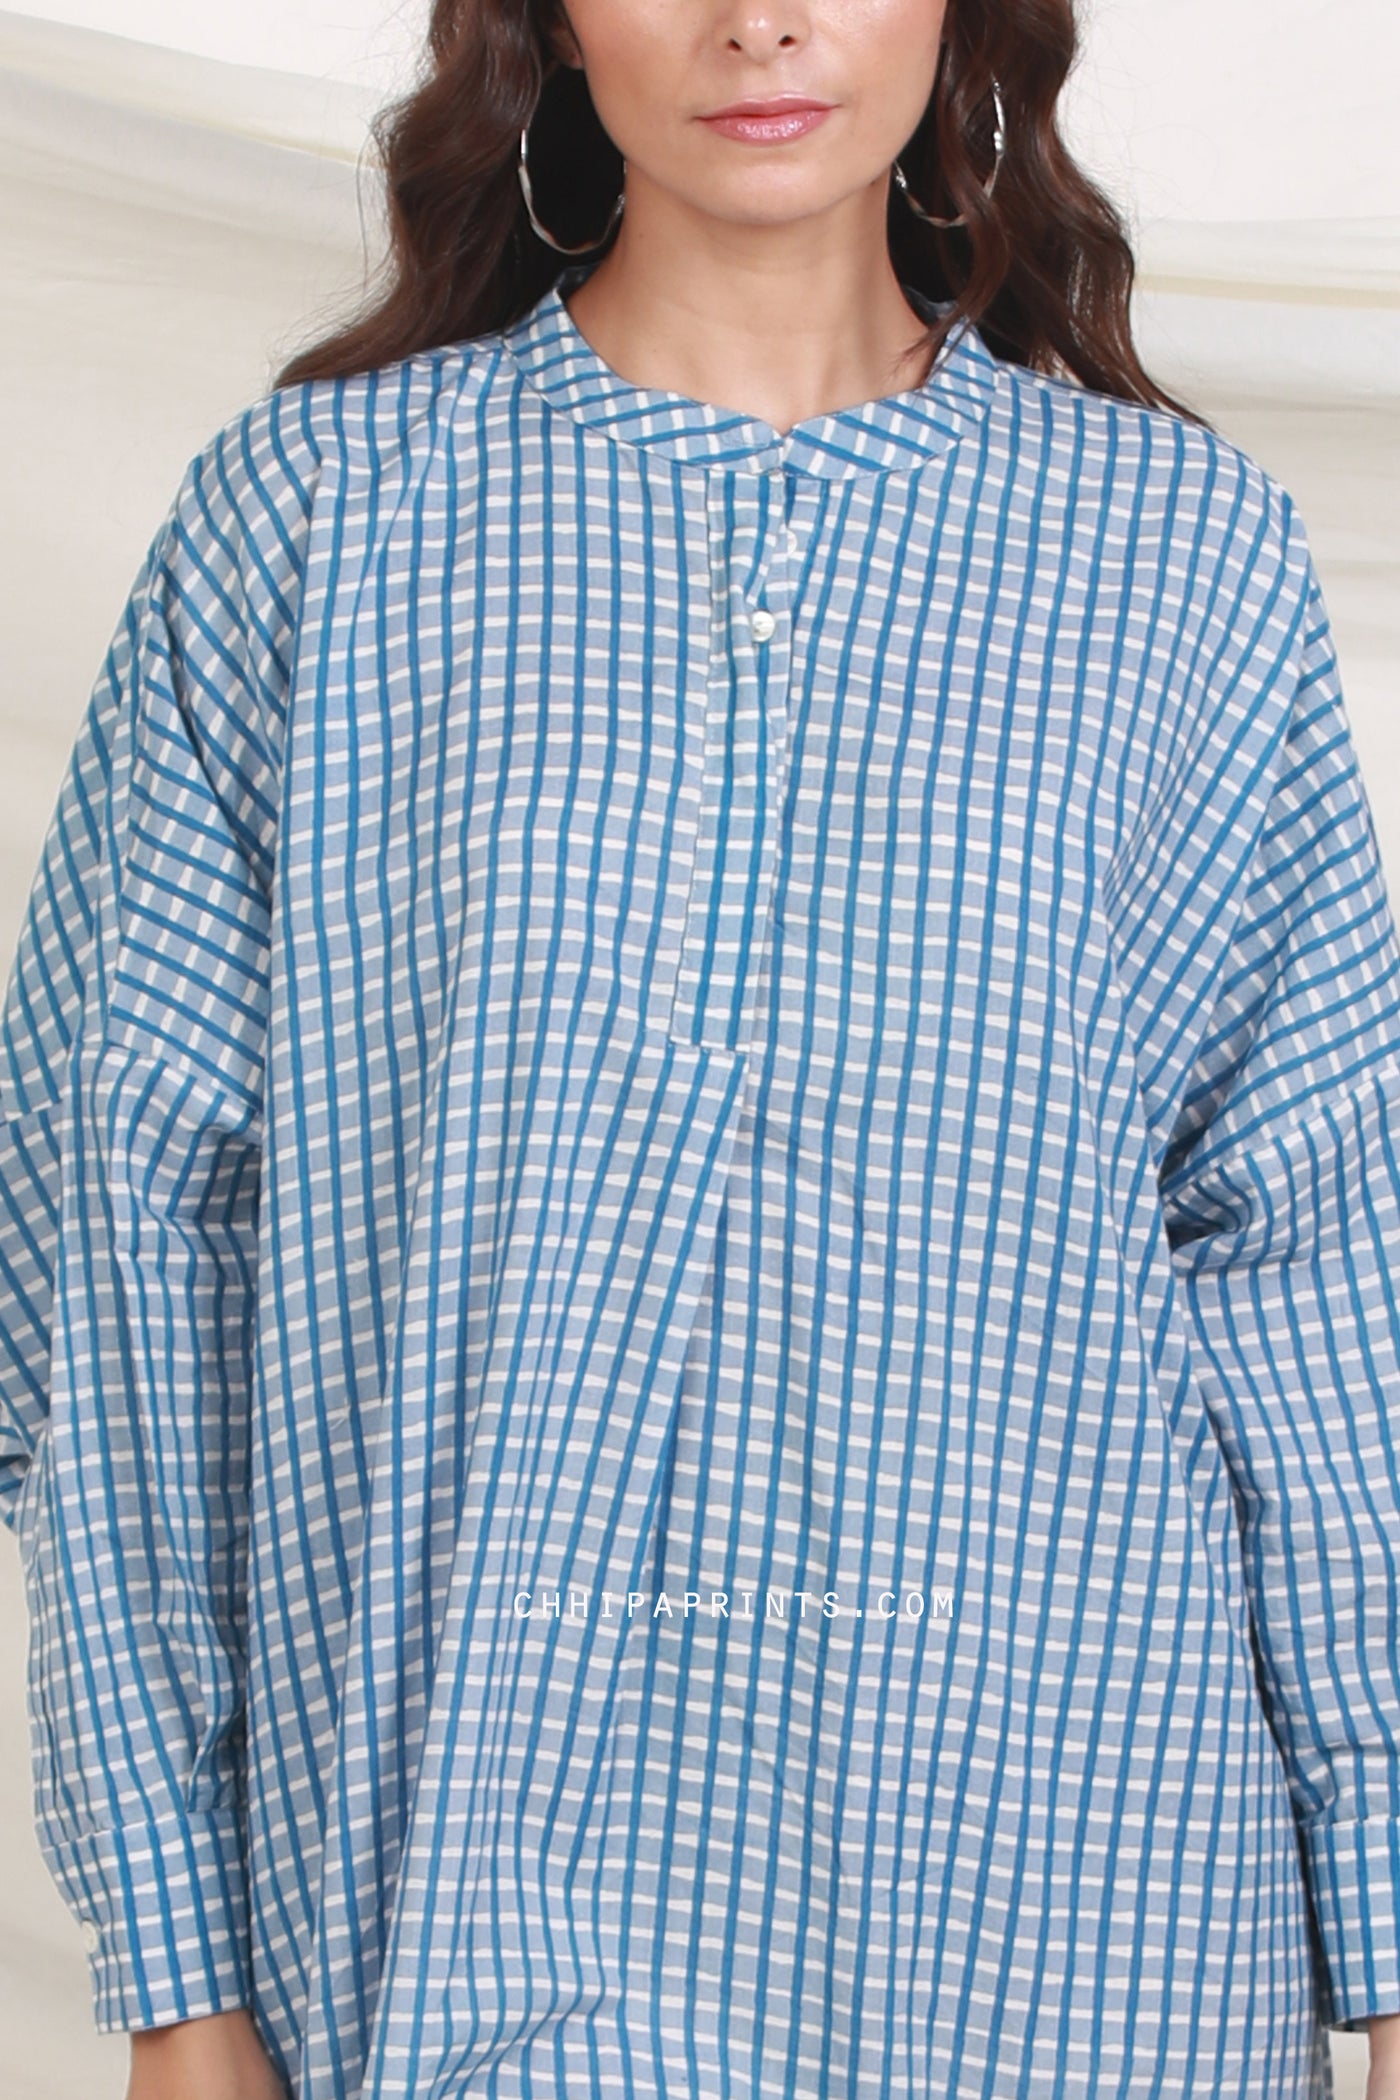 Cotton Checks Print Sunday Tunic in Shades of Blue and White